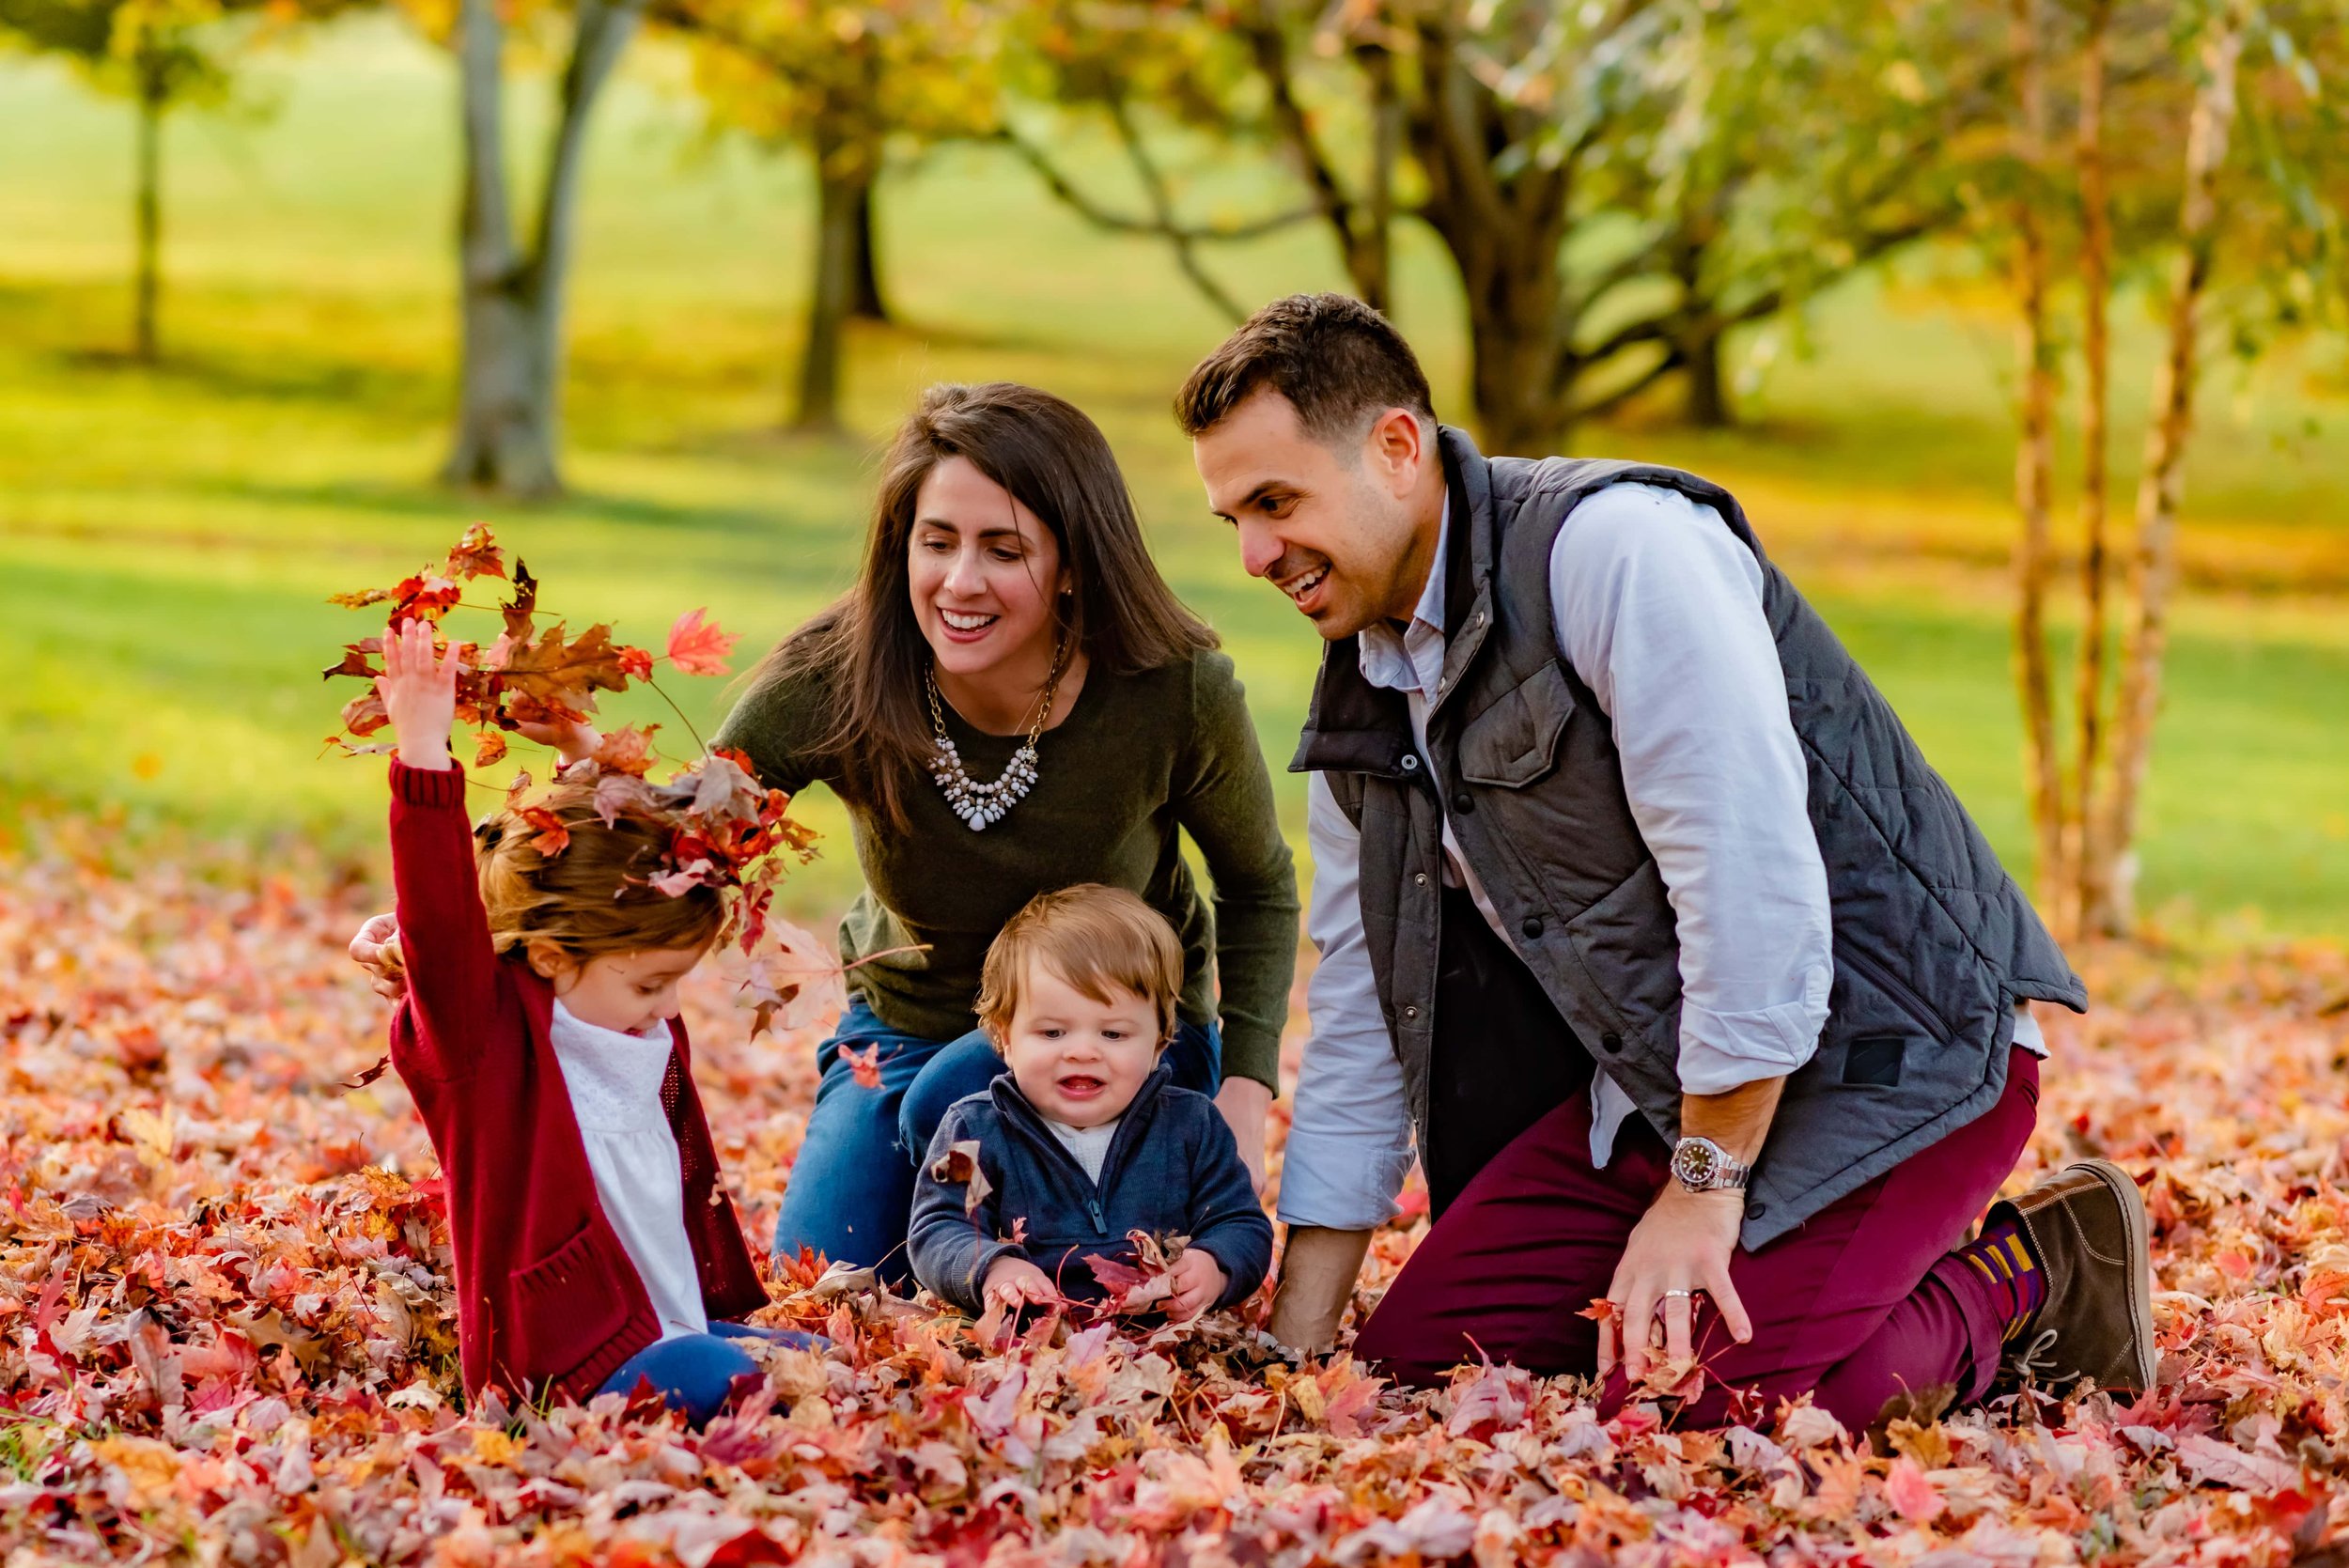 Maryland Family Fall Photo - Laughing in the Leaves